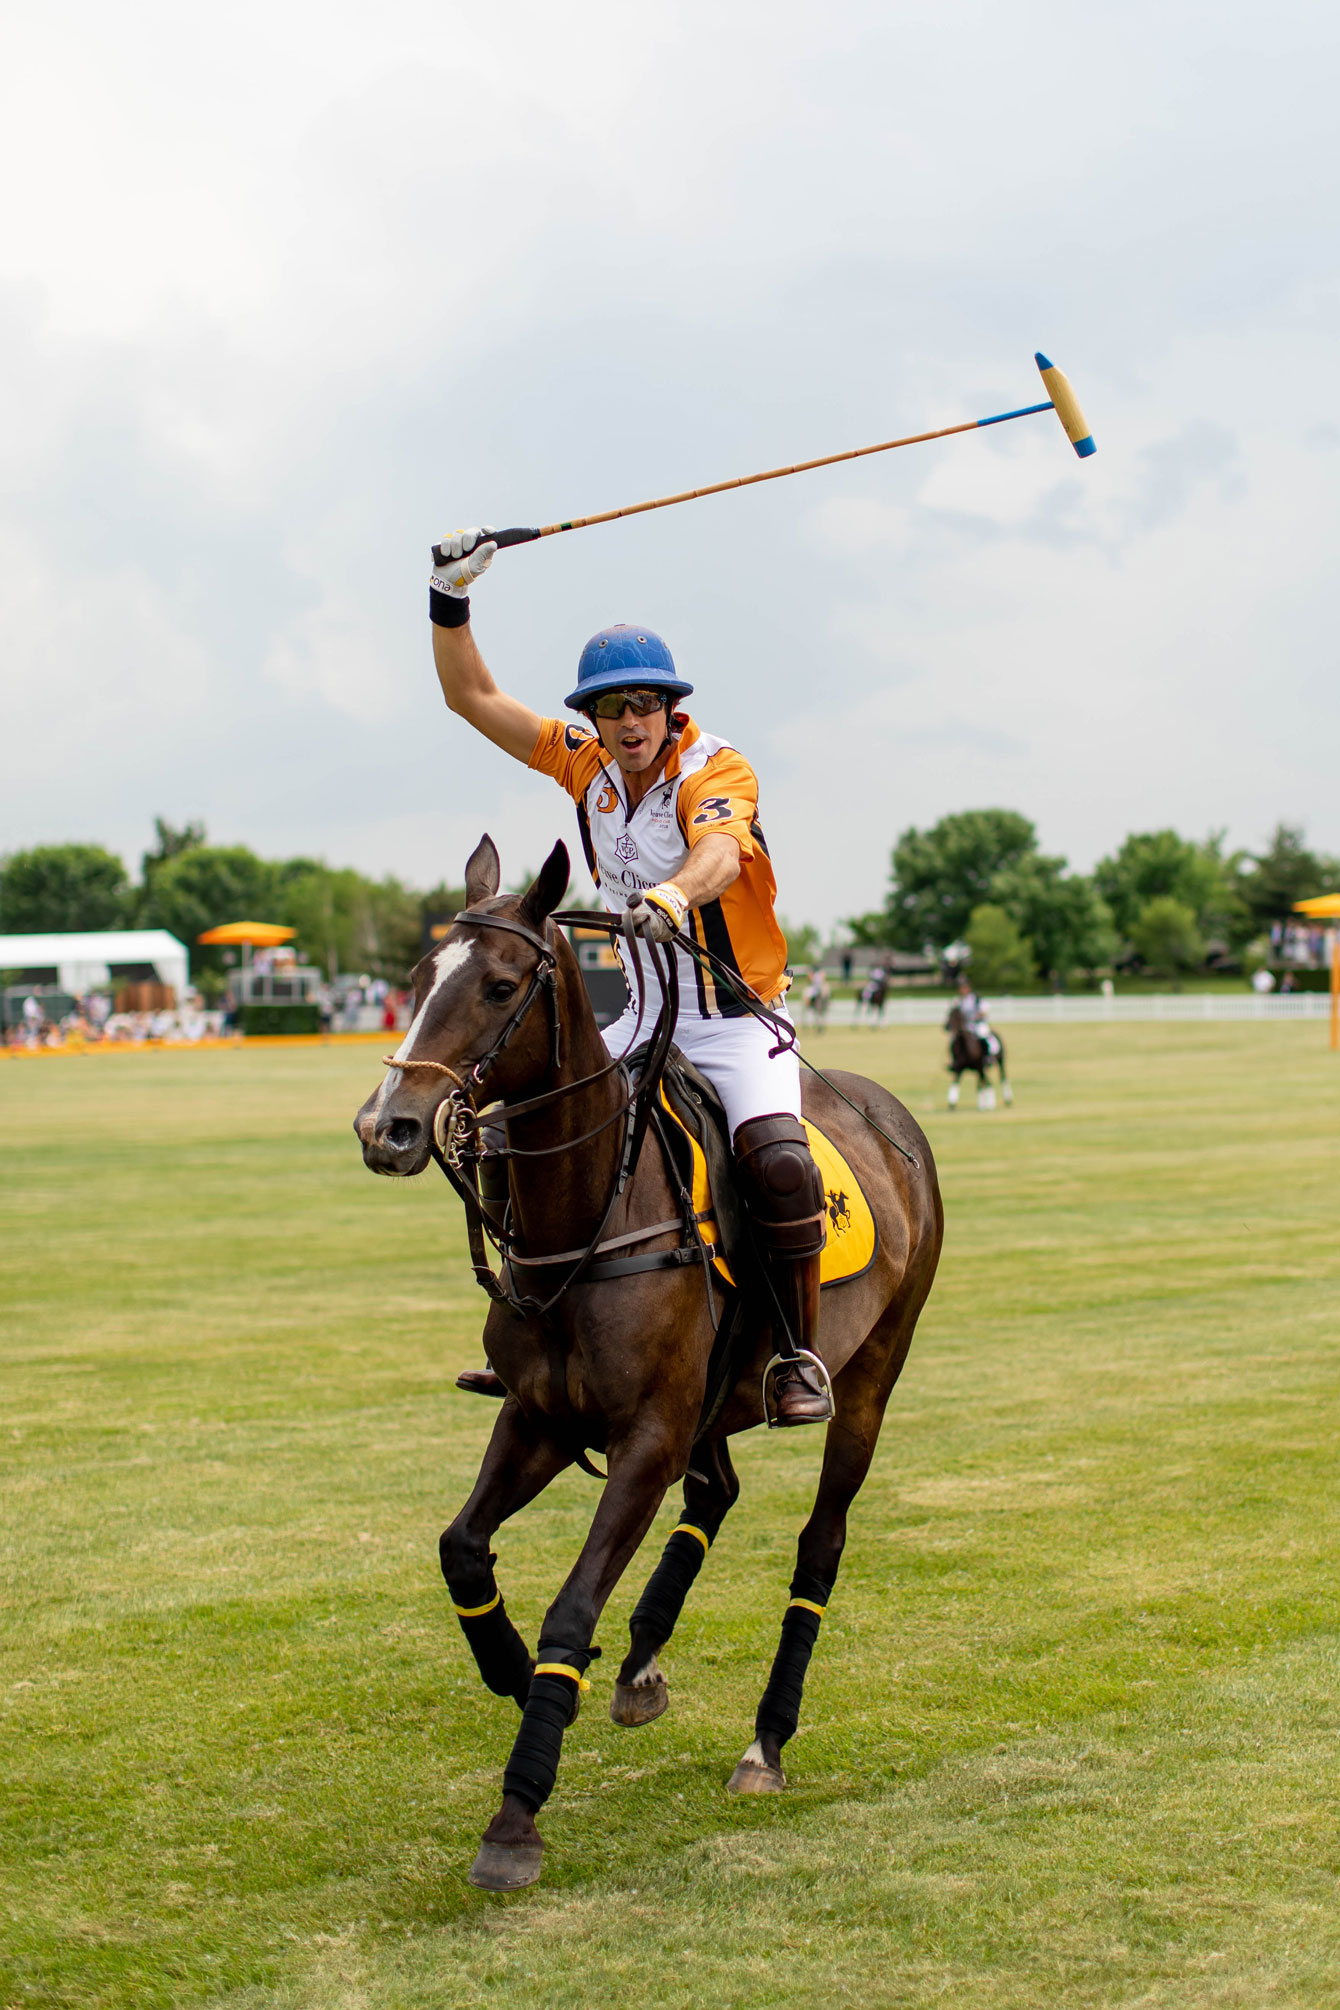 Veuve Clicquot Polo Classic Virtually Toasts America - The Knockturnal